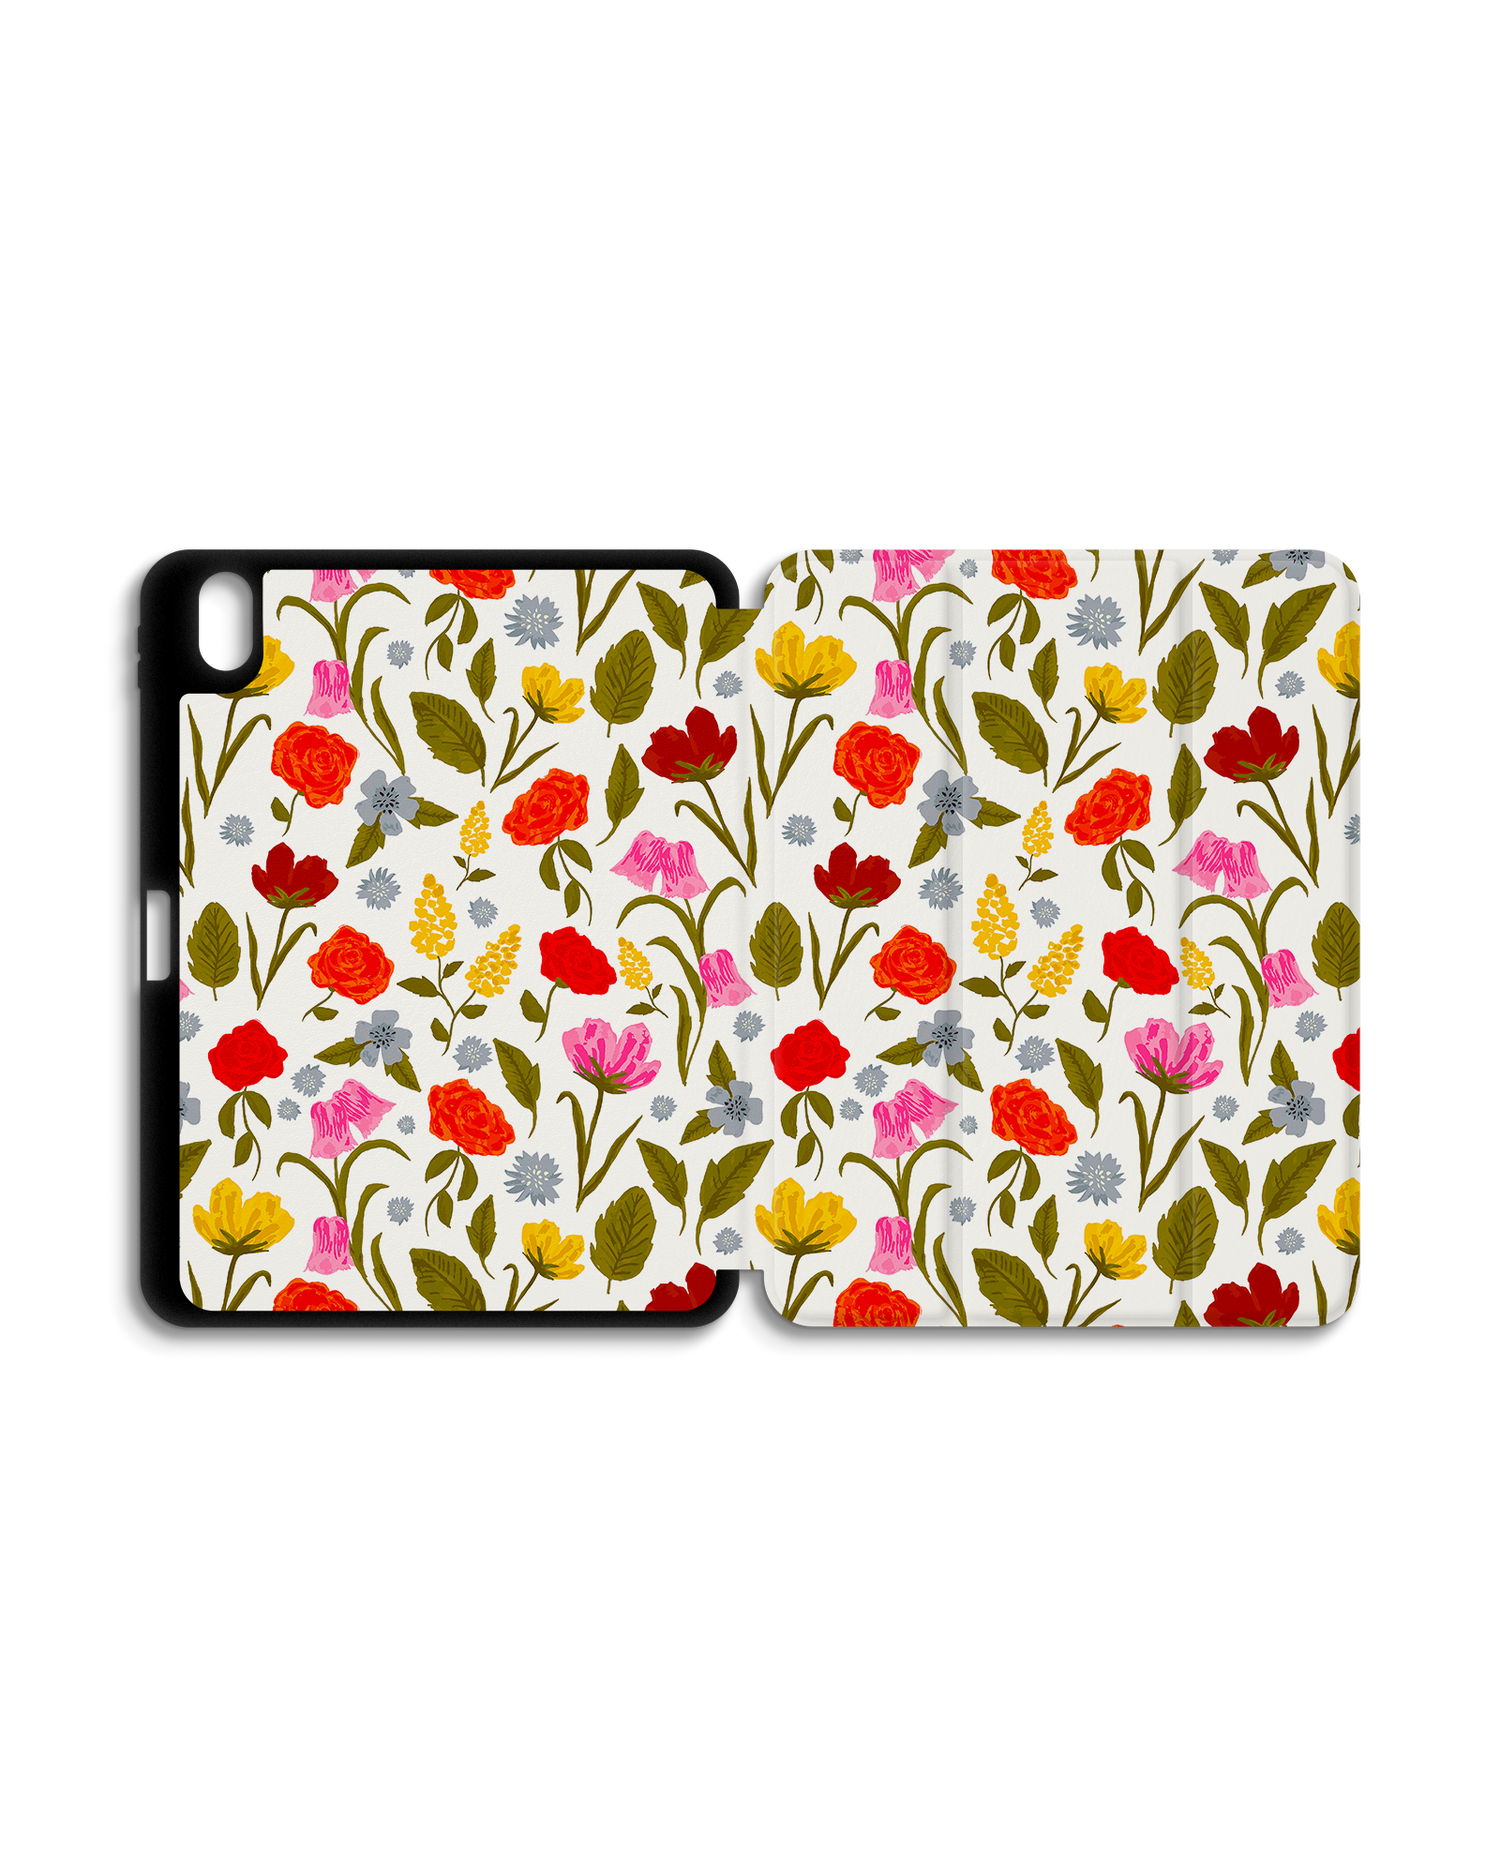 Botanical Beauties iPad Case with Pencil Holder for Apple iPad (10th Generation): Opened exterior view